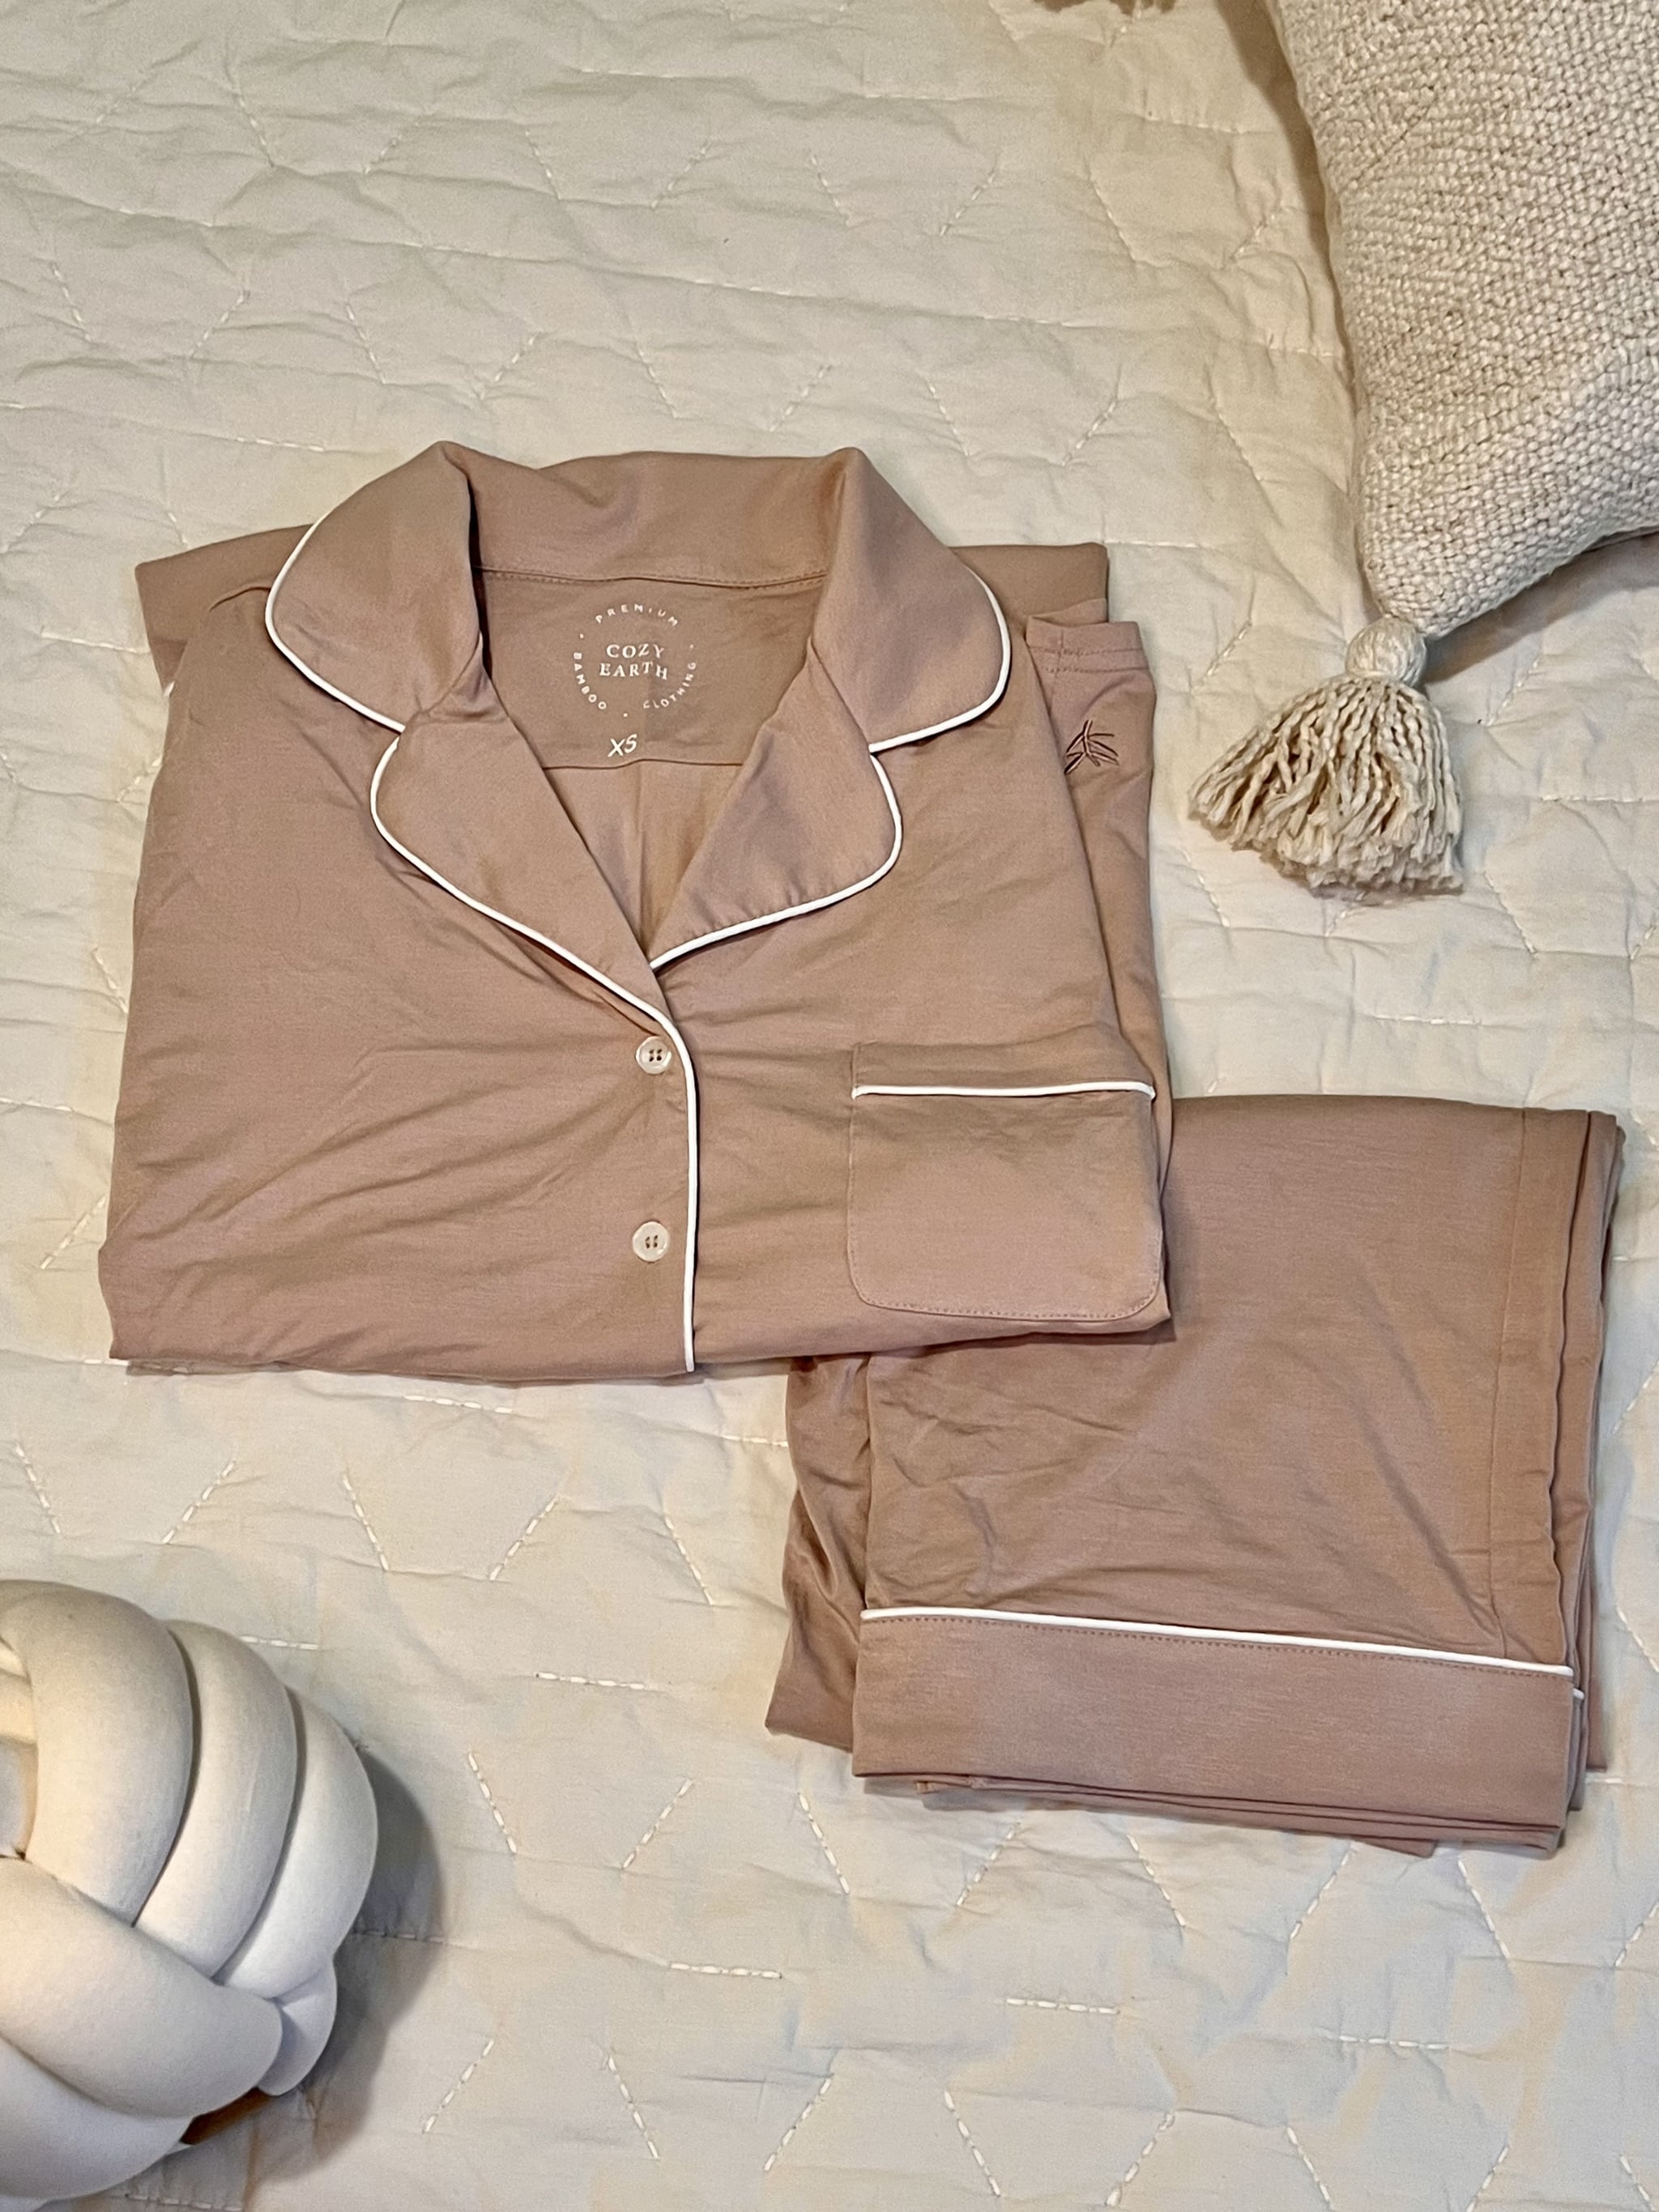 Cosy Earth Bamboo Pajama Set on bed.